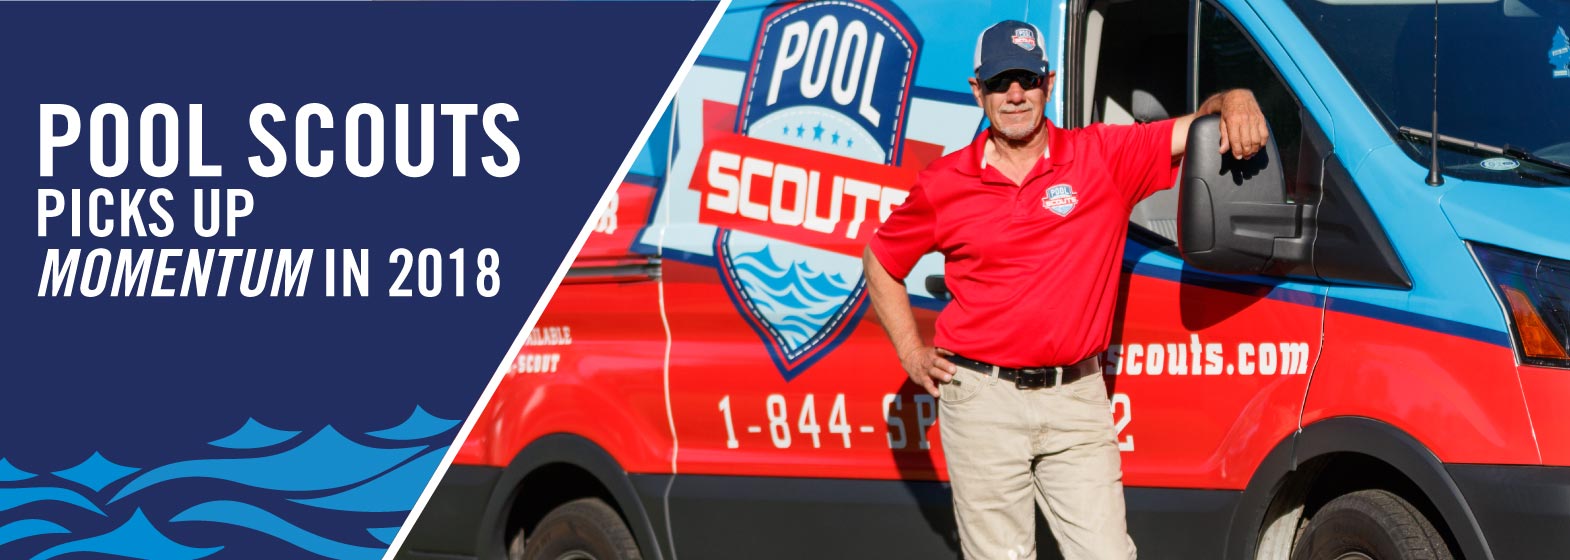 Image of Pool Scouts Picks Up Momentum in 2018